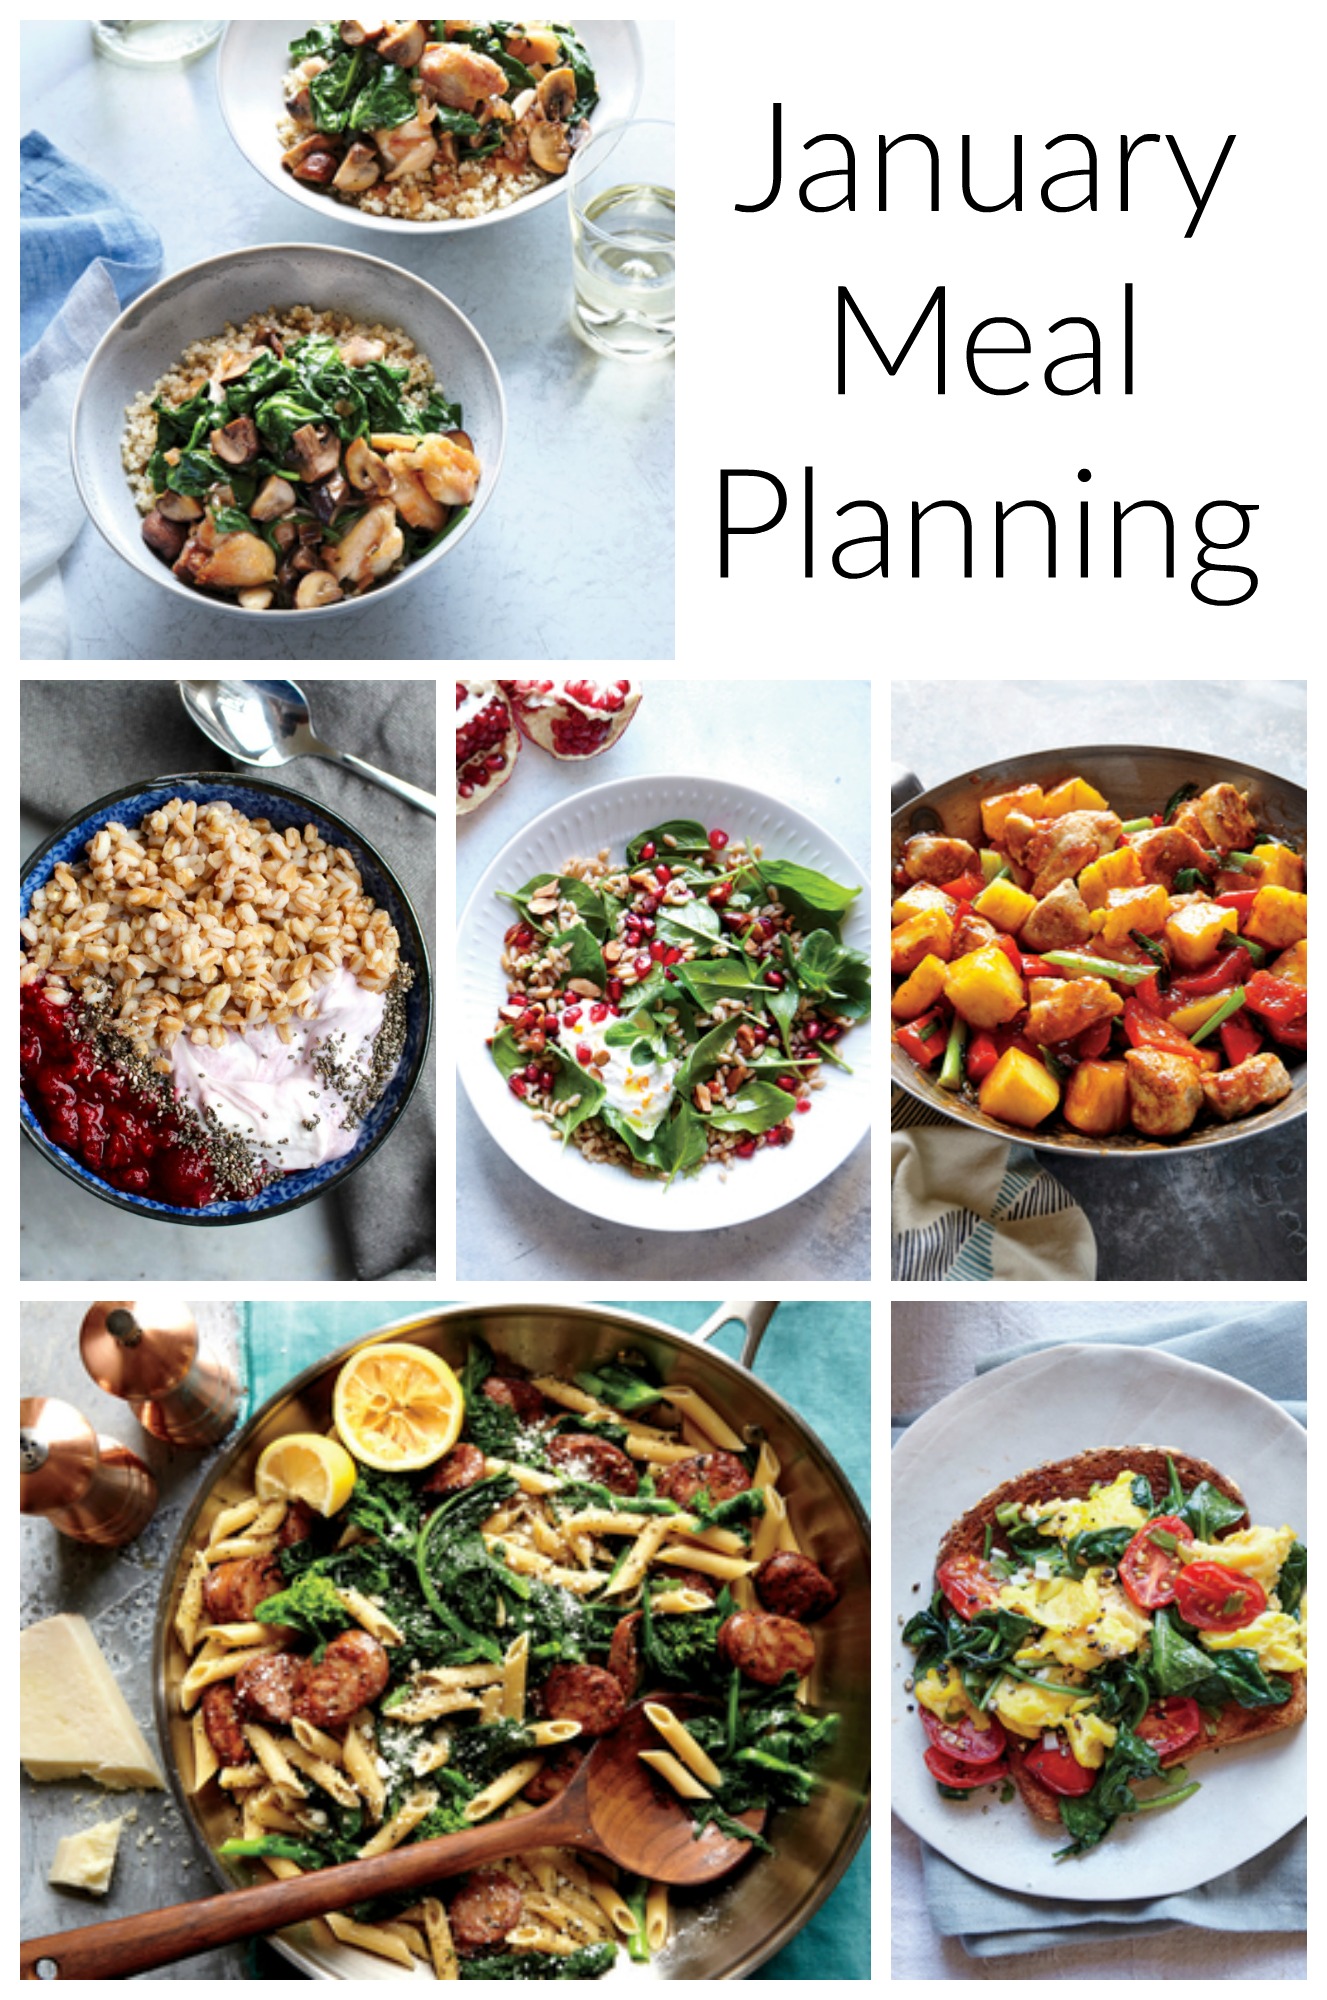 Healthy eating and meal planning ideas to help you in the kitchen.